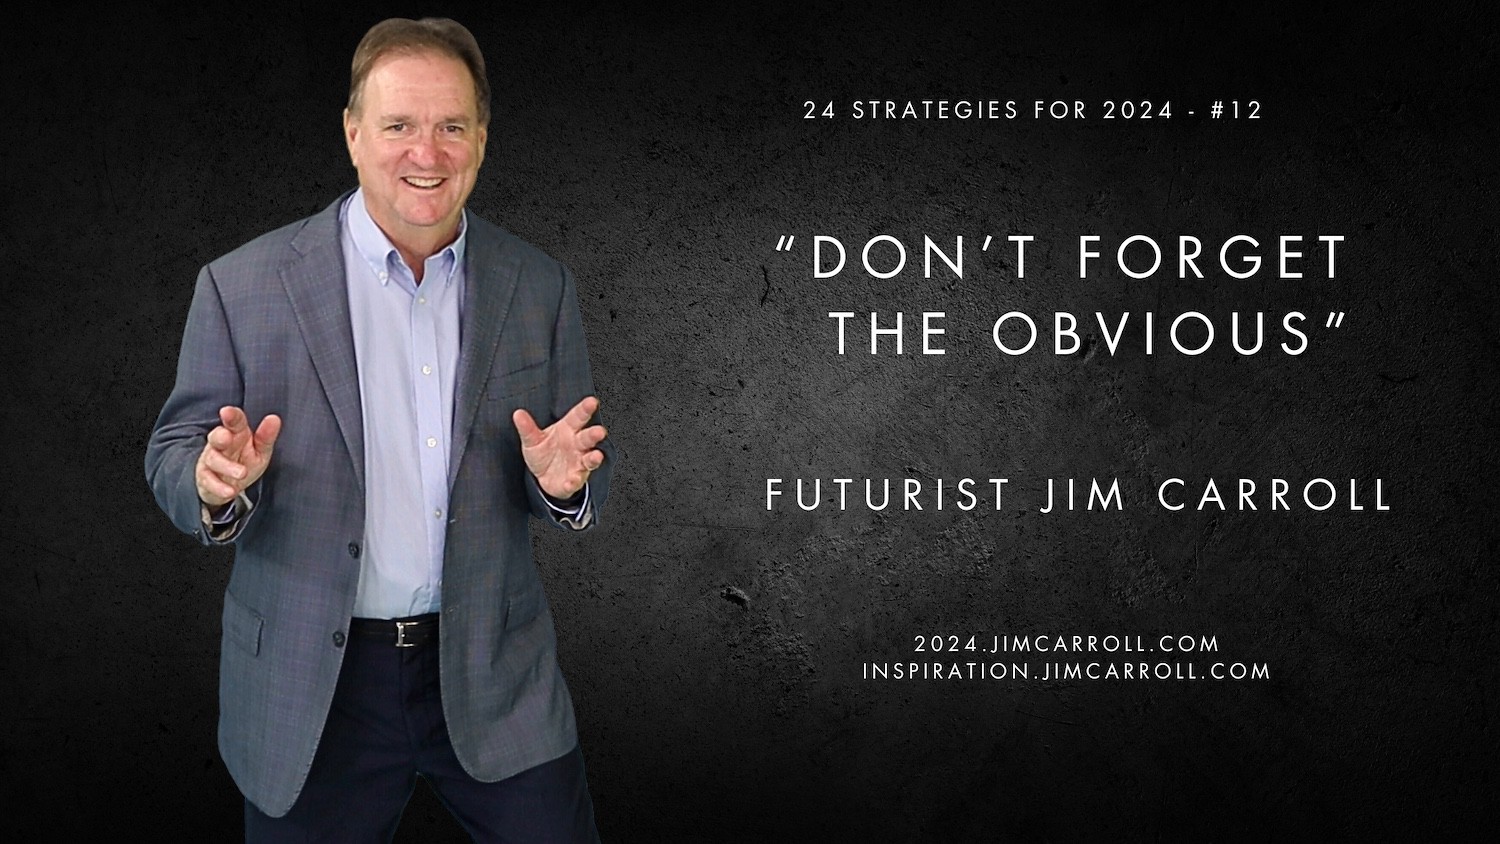 "Don't forget the obvious" - Futurist Jim Carroll